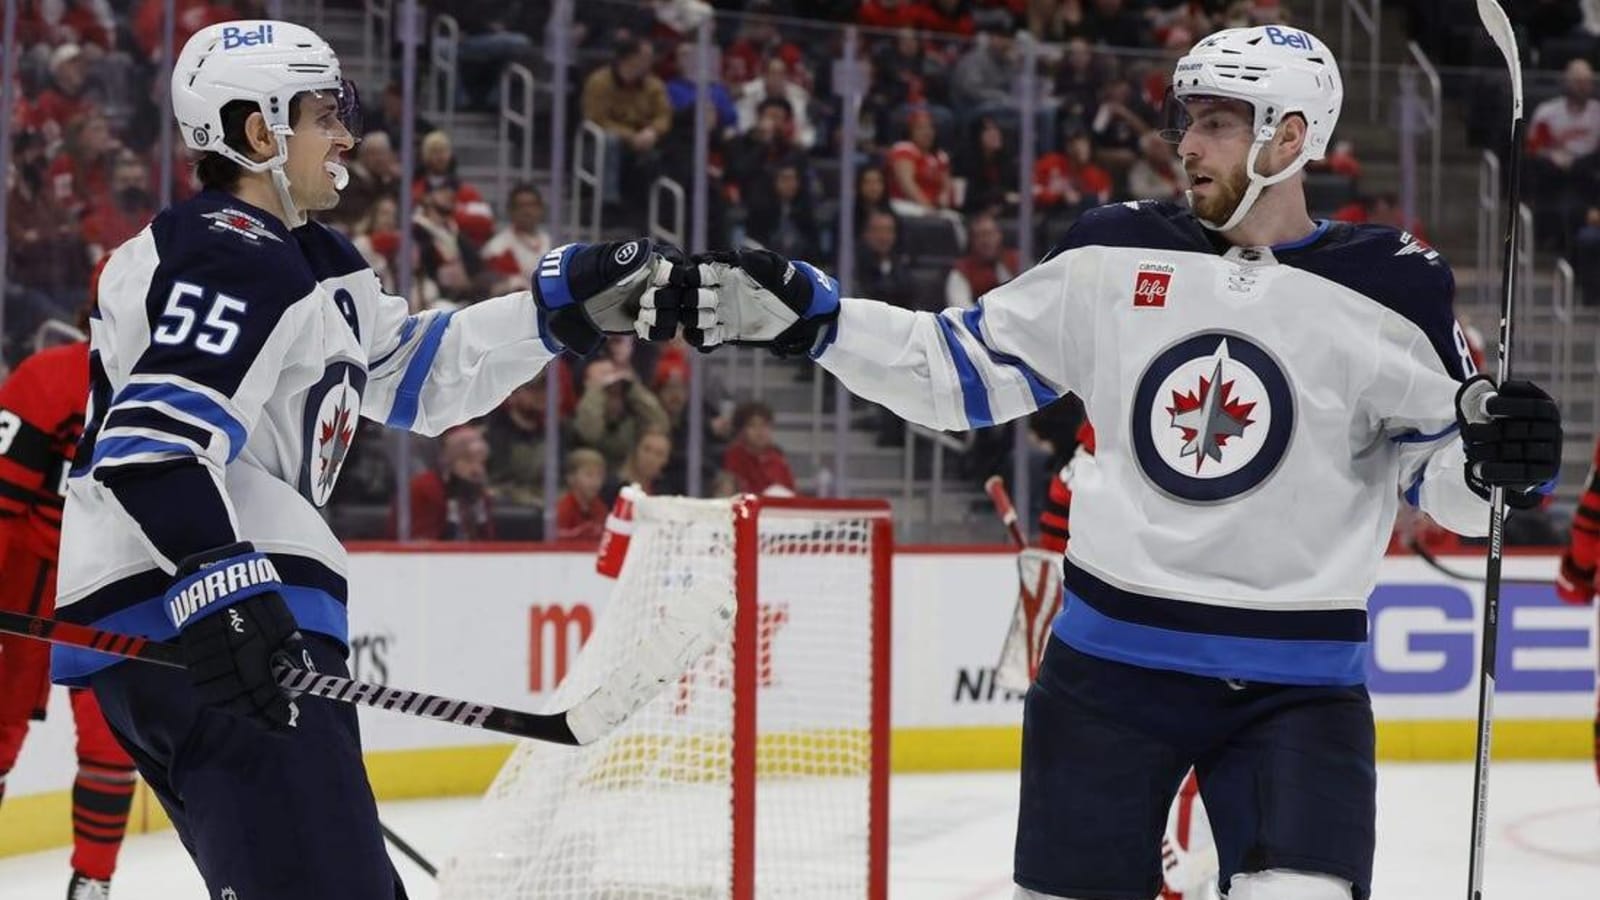 Jets try to continue dominant stretch against Canadiens